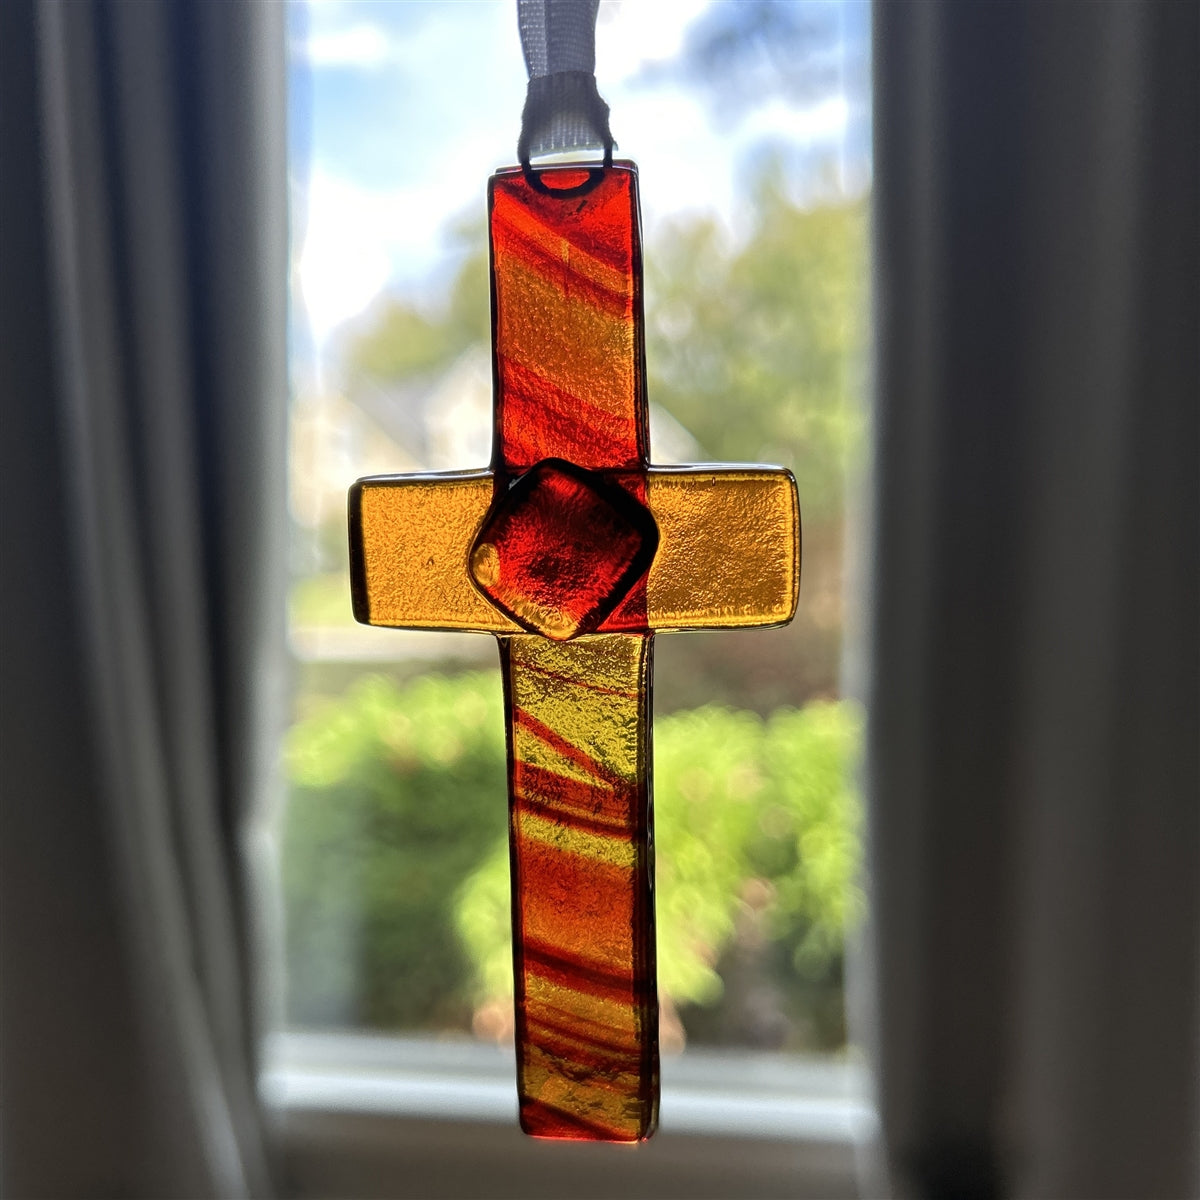 Glass cross with the light shining through to show the swirls of amber and brown in the glass.